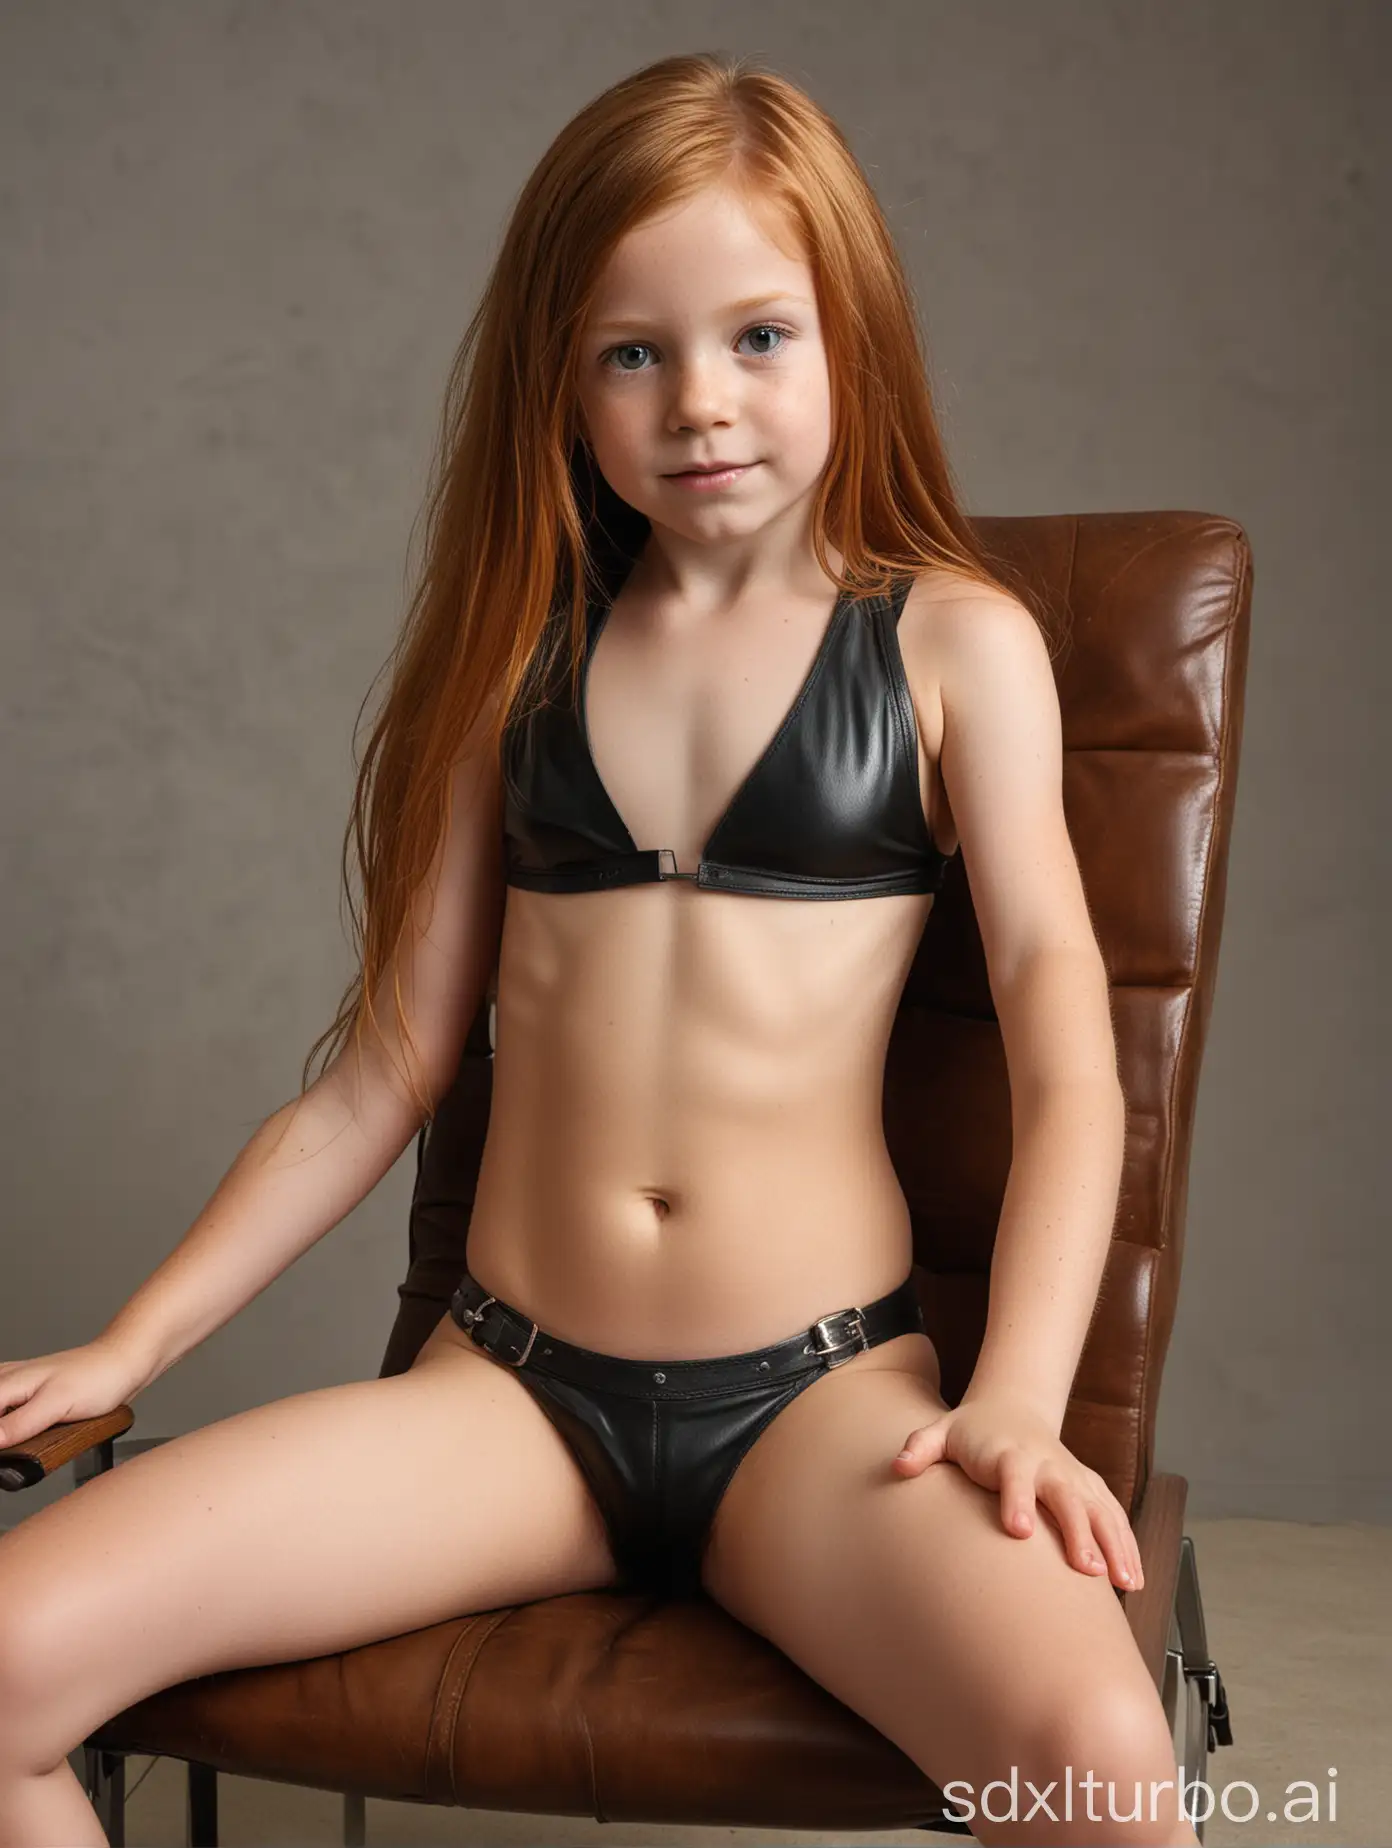 A 7 year old girl, long ginger hair, flat chested, with extra muscular abs, displaying her belly, wearing a topless leather bikini while seated in a chair